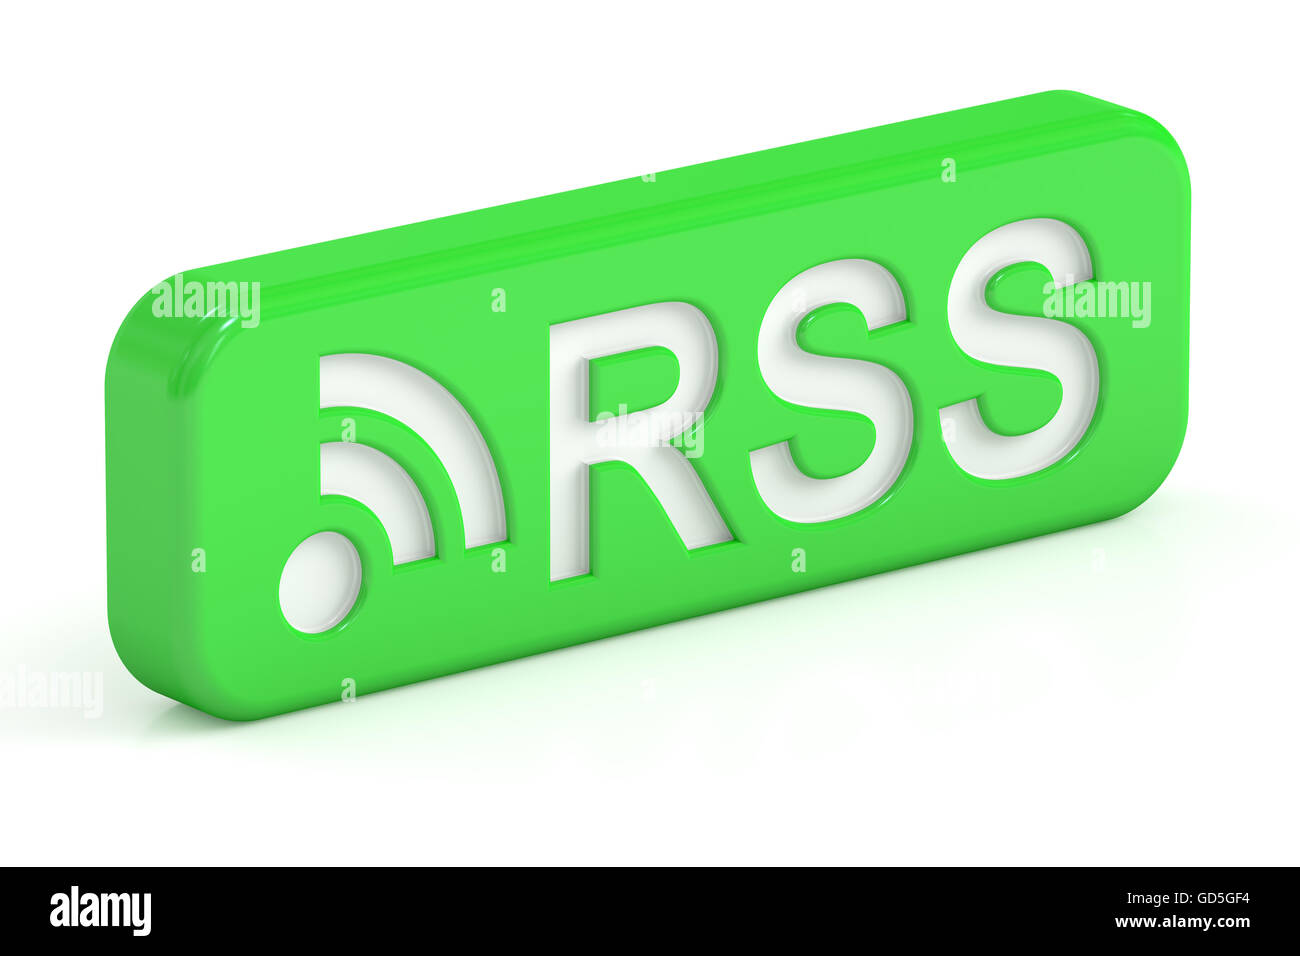 RSS icon, 3D rendering isolated on white background Stock Photo